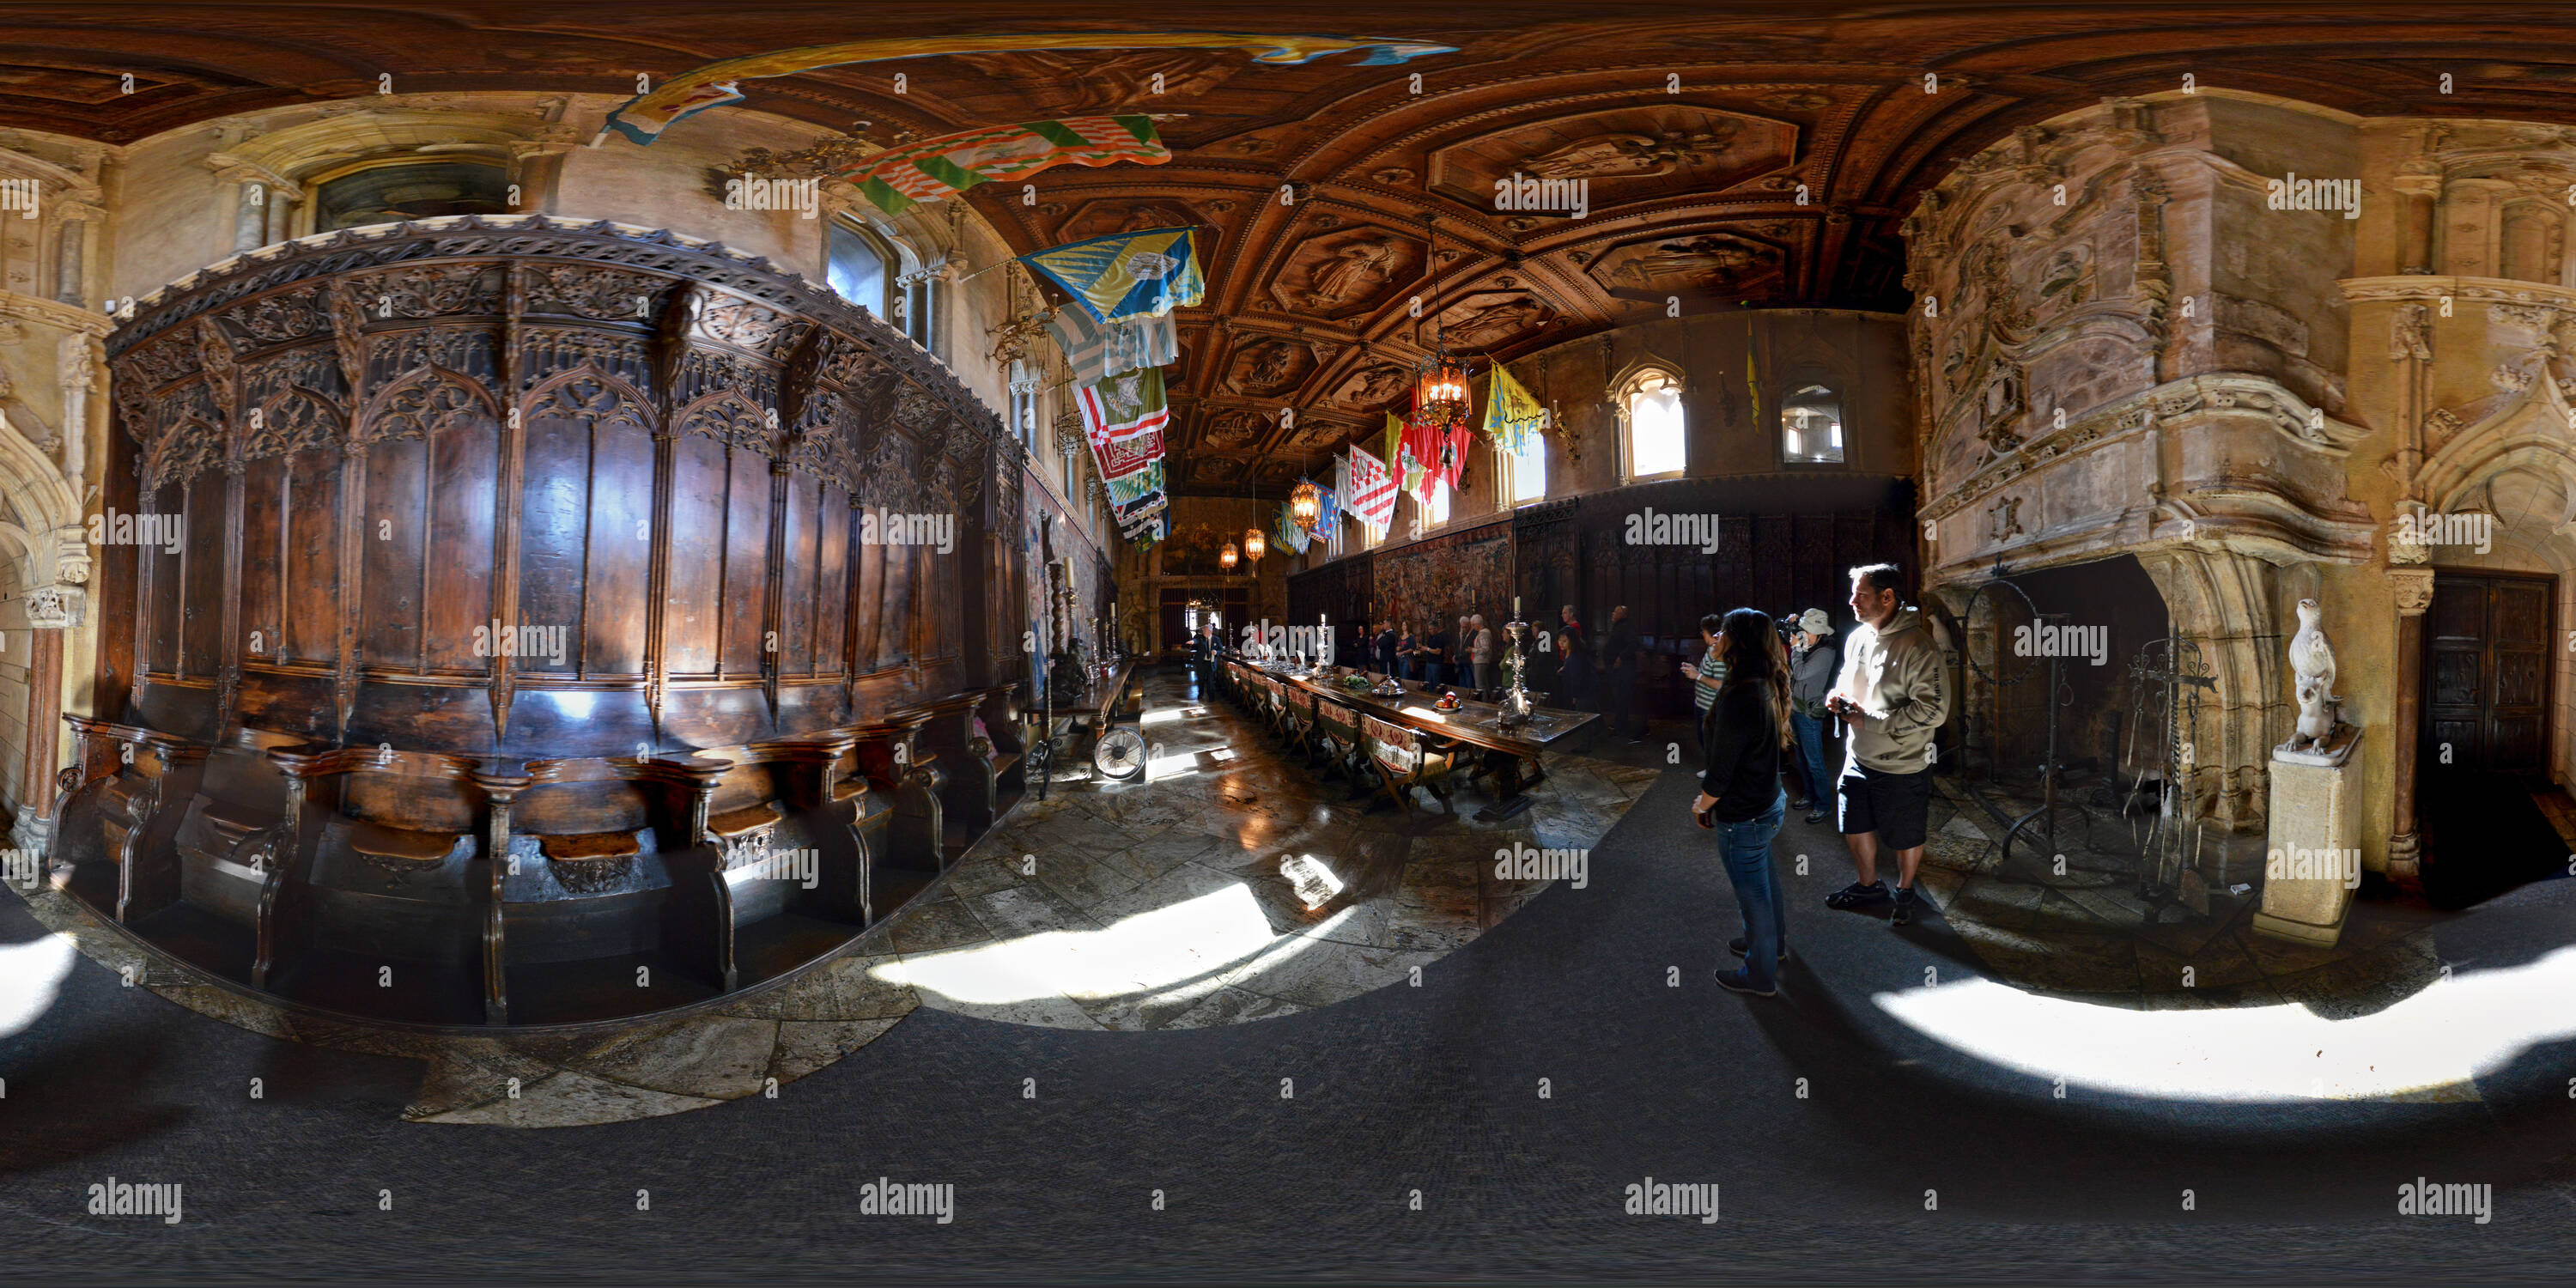 360 degree panoramic view of Hearst Castle Dining Room